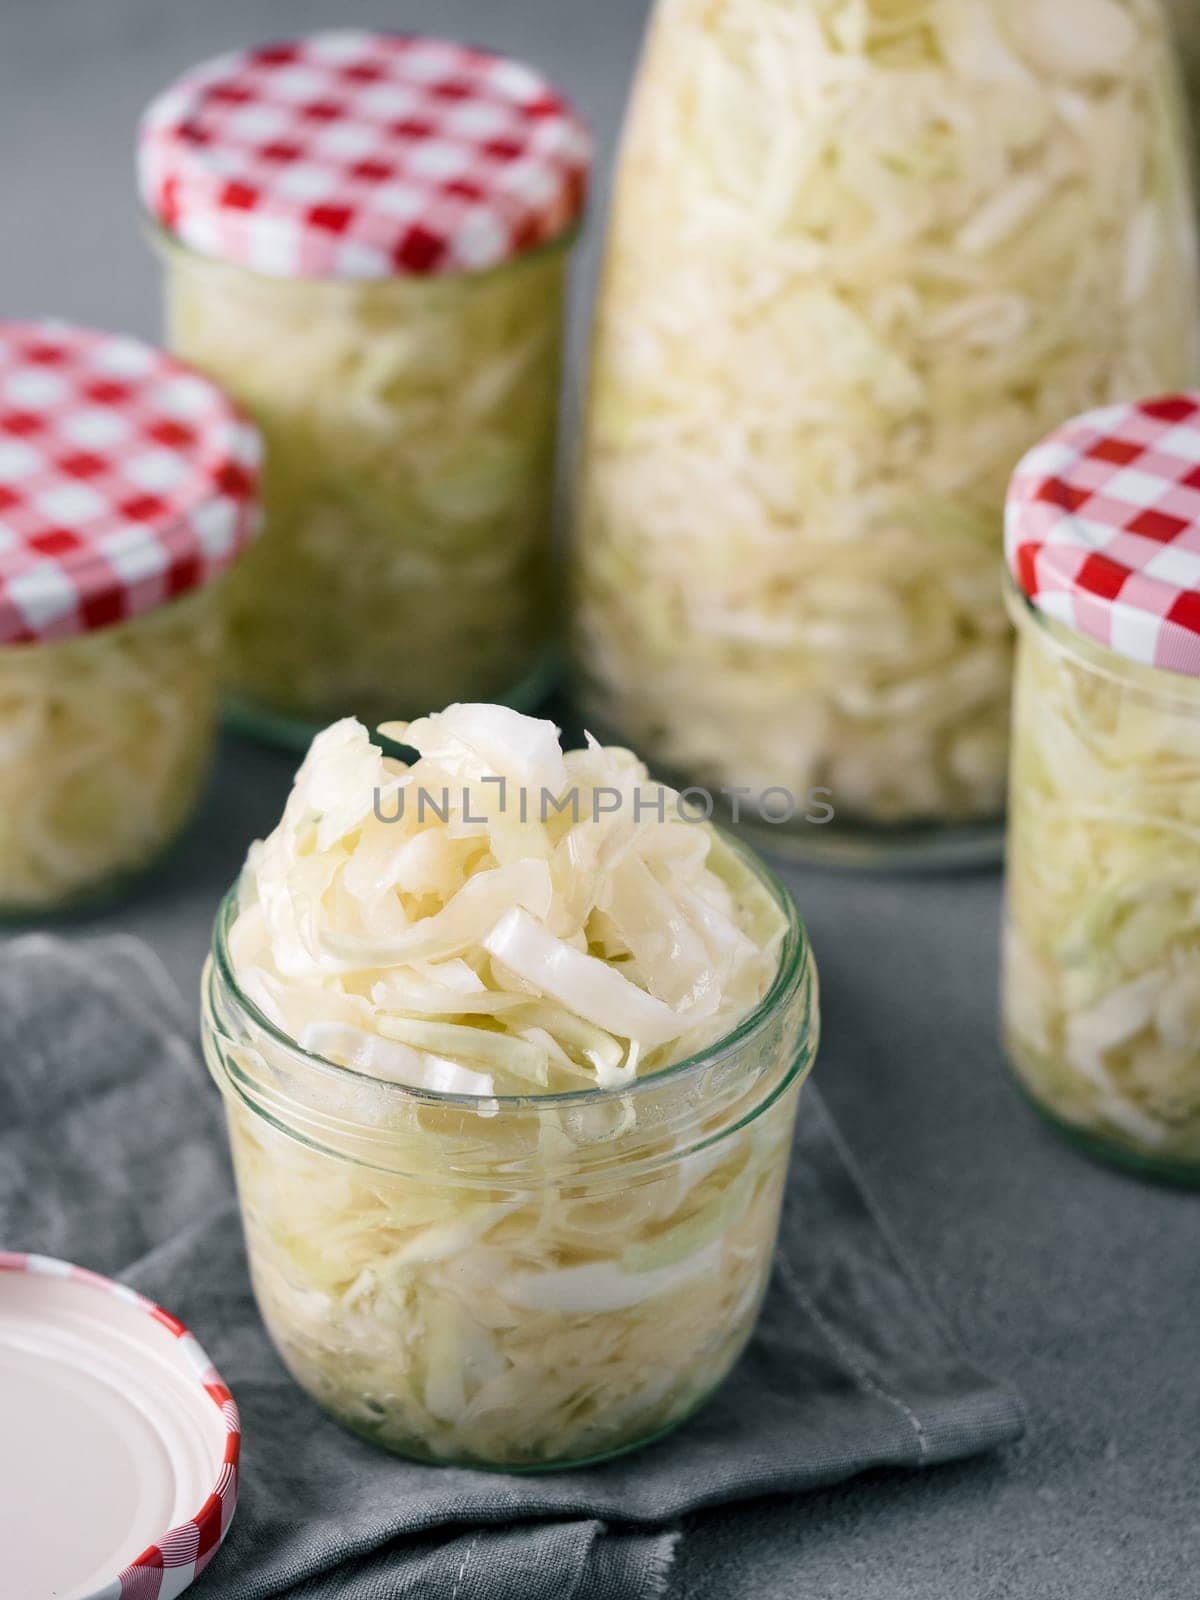 Sauerkraut in open glass mason jar. Pickling cabbage at home on table. The best natural probiotic. Homemade kraut., copy space for text. Vertical.